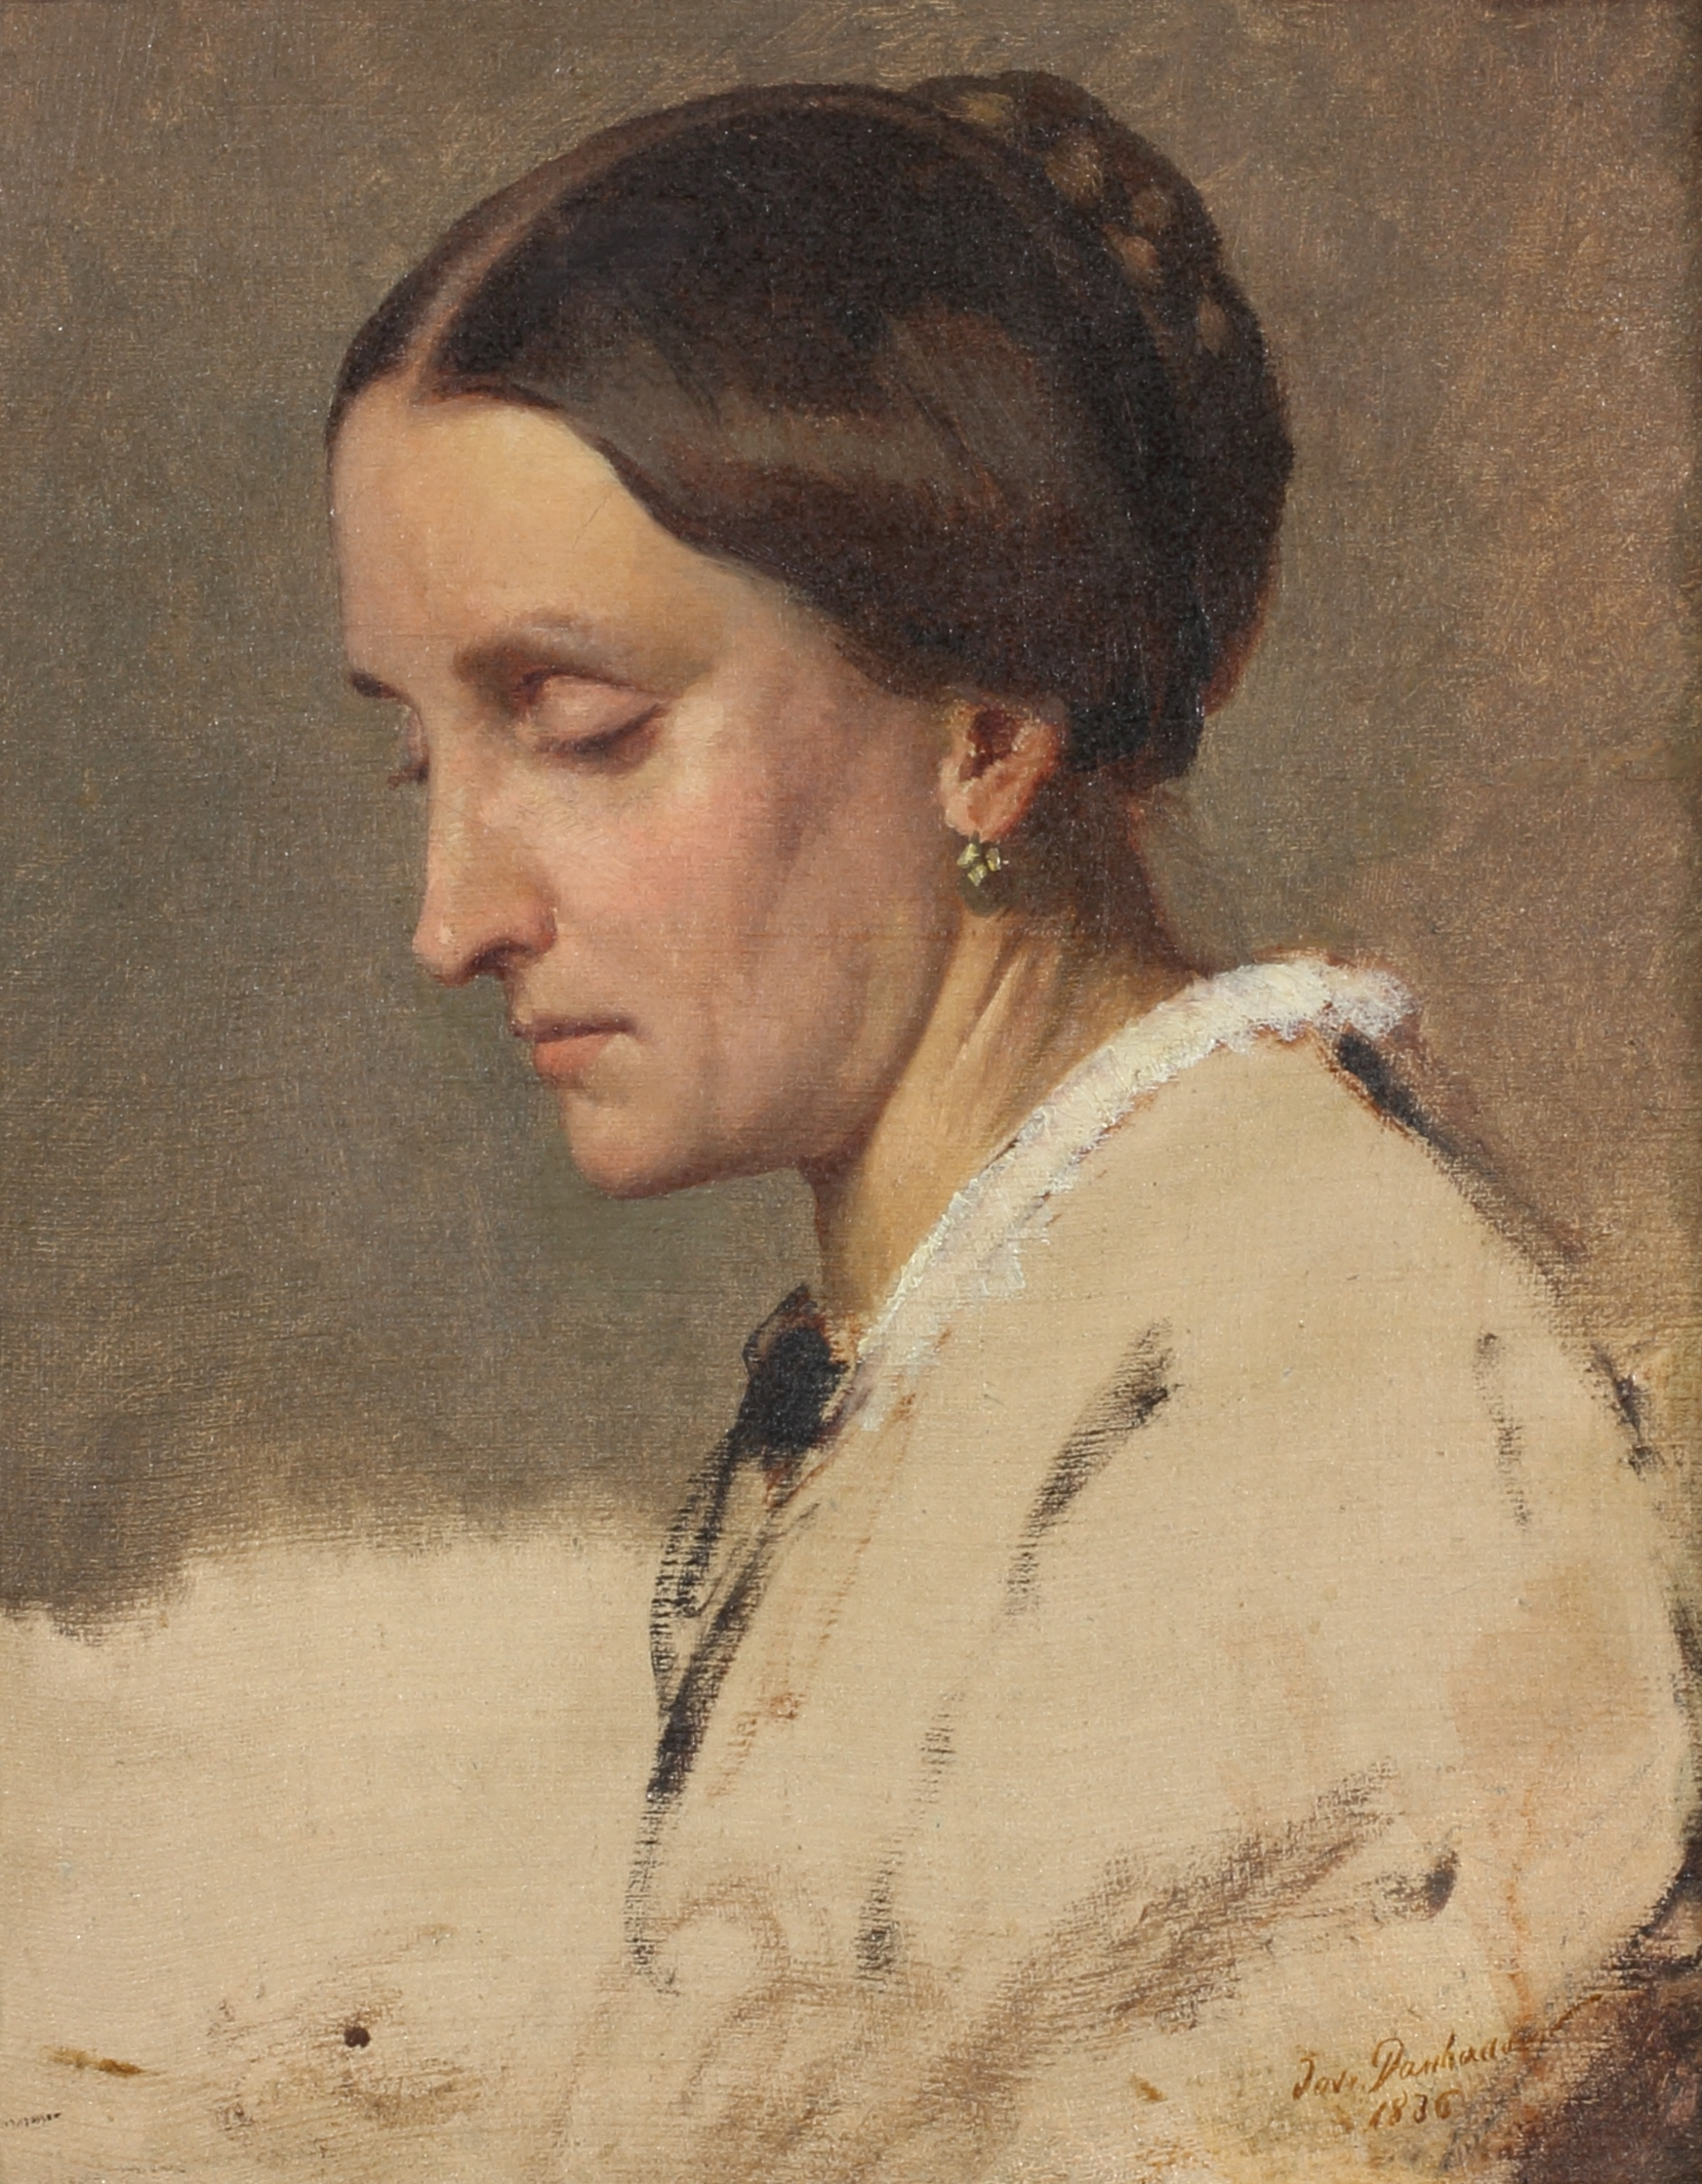 Portrait of a woman with her brown hair up, in a white outfit, who is looking down with eyes closed.